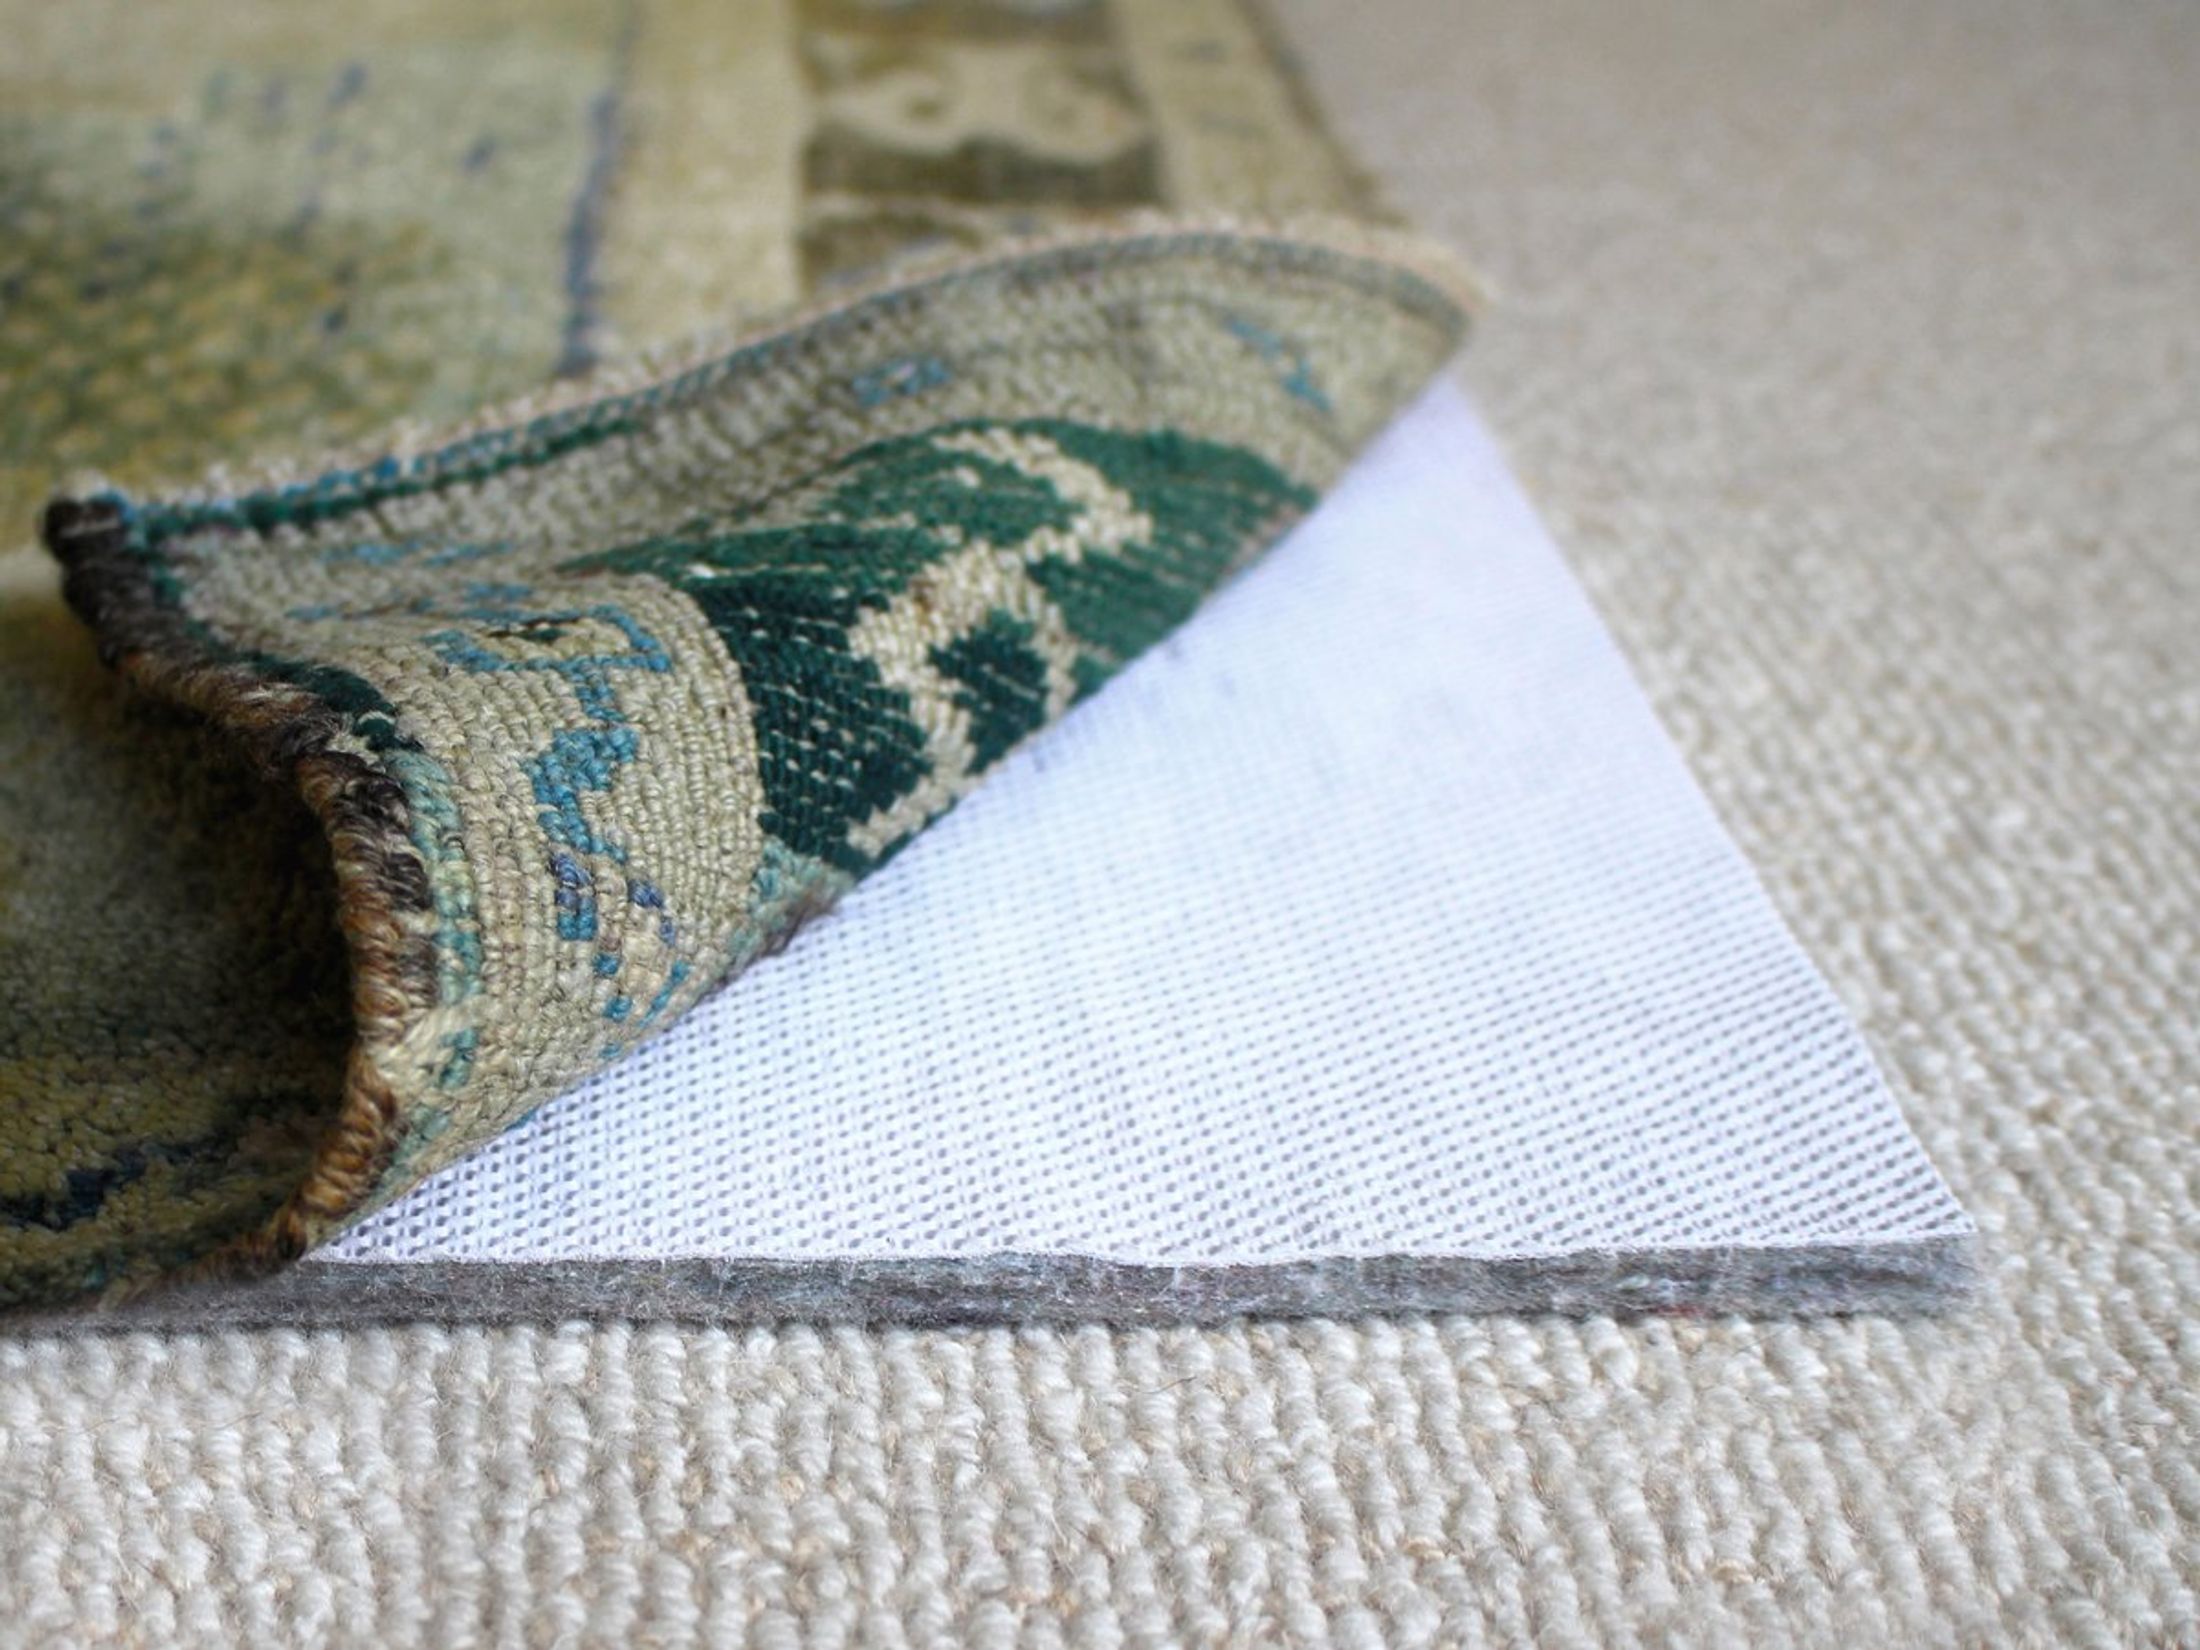 11 Tips for How to Keep Rugs From Sliding